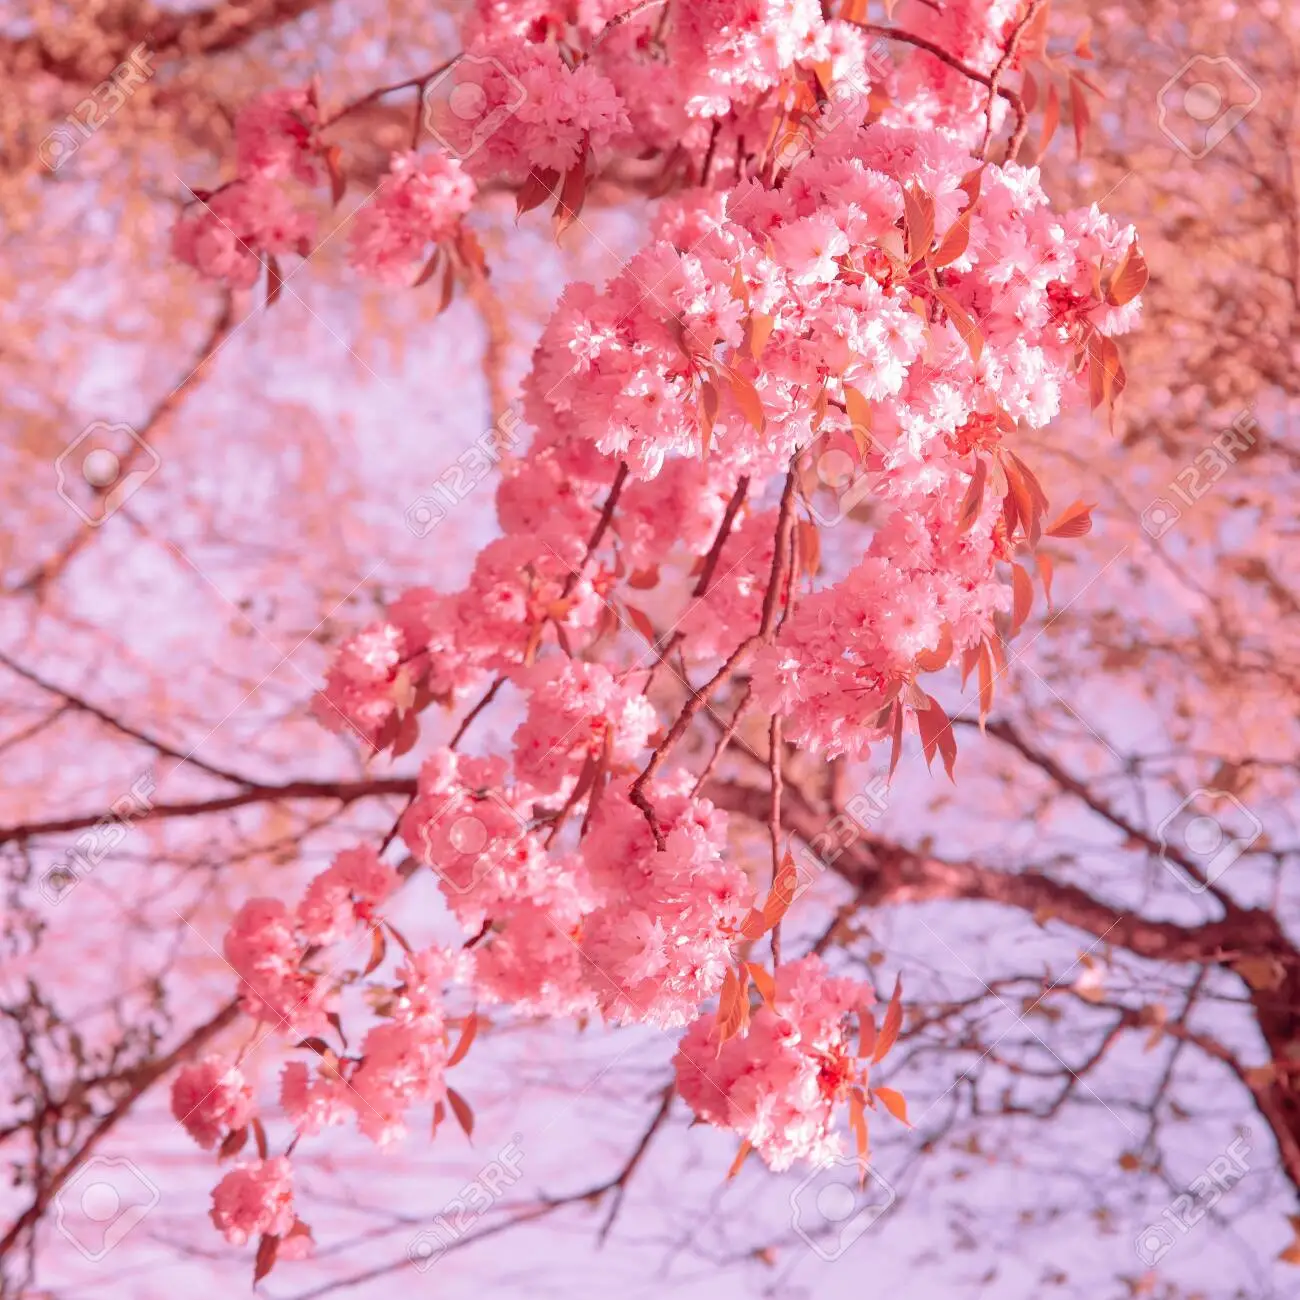 Fashion wallpaper pink flowers aesthetics cherry blossom tree stock photo picture and royalty free image image